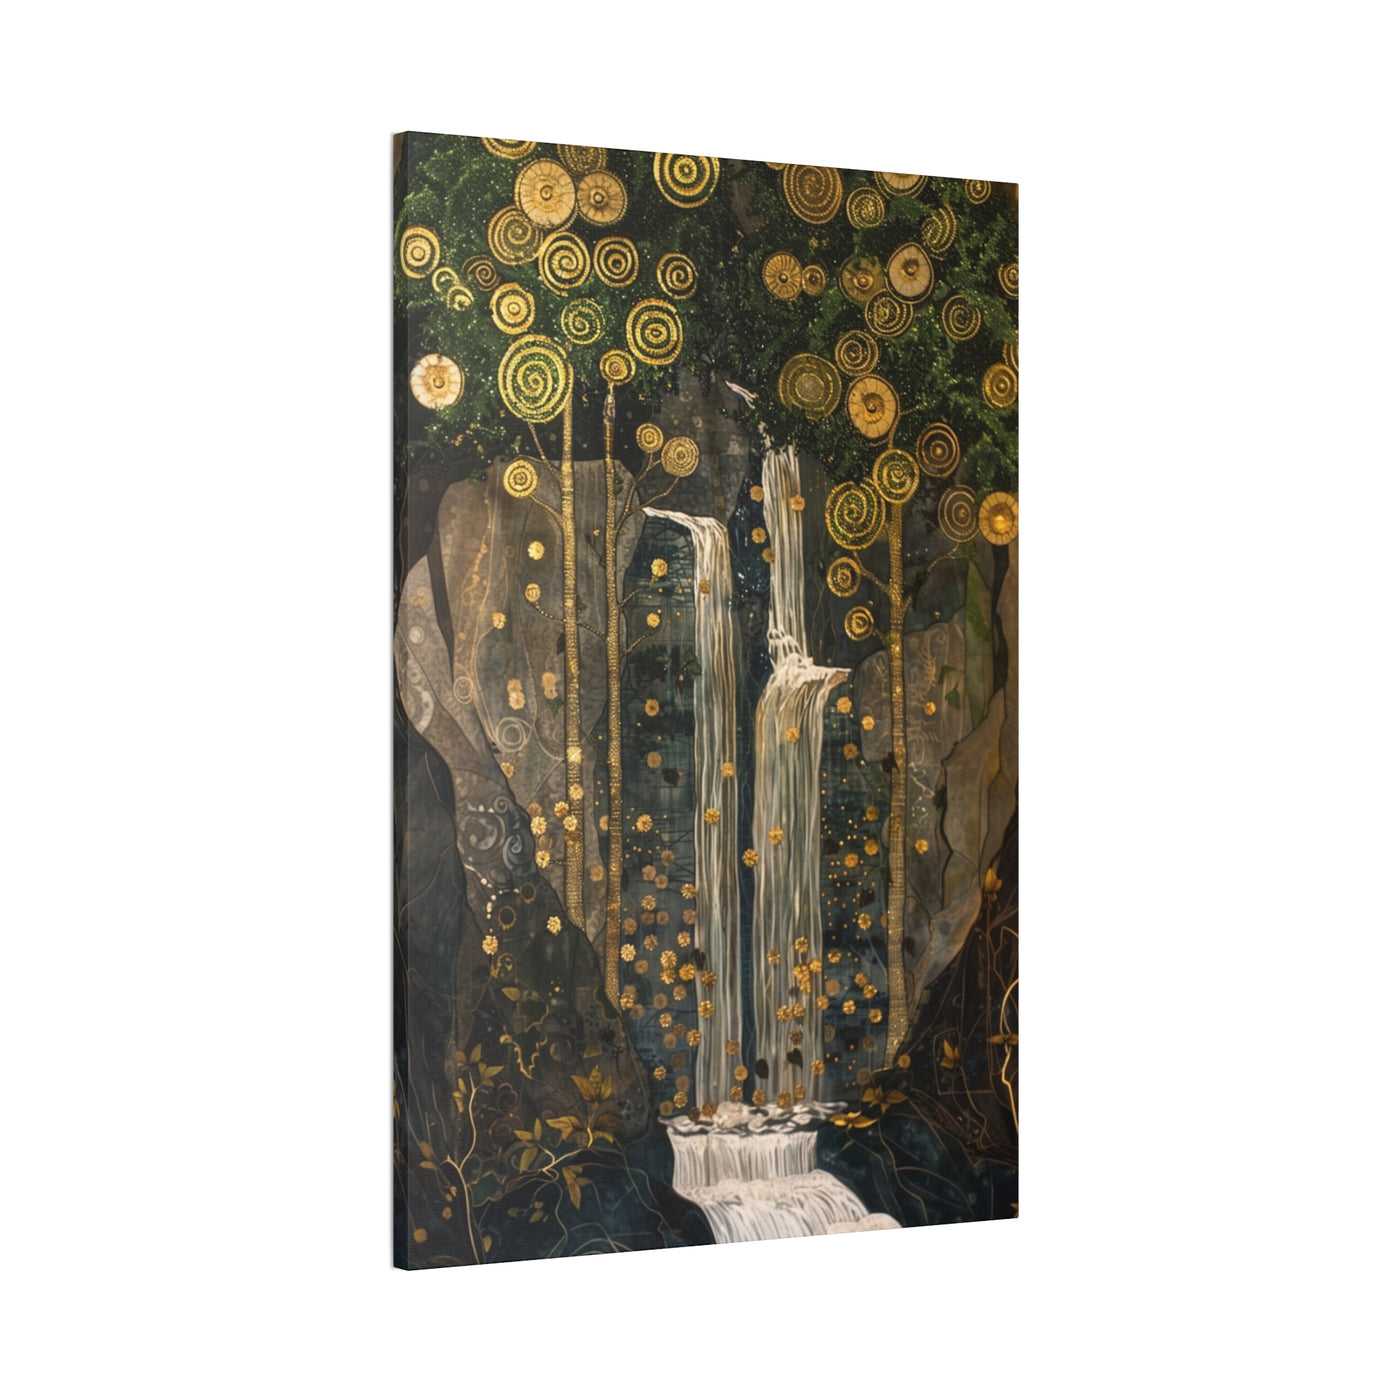 Product image of canvas print wall art featuring a waterfall surrounded by golden trees sideview